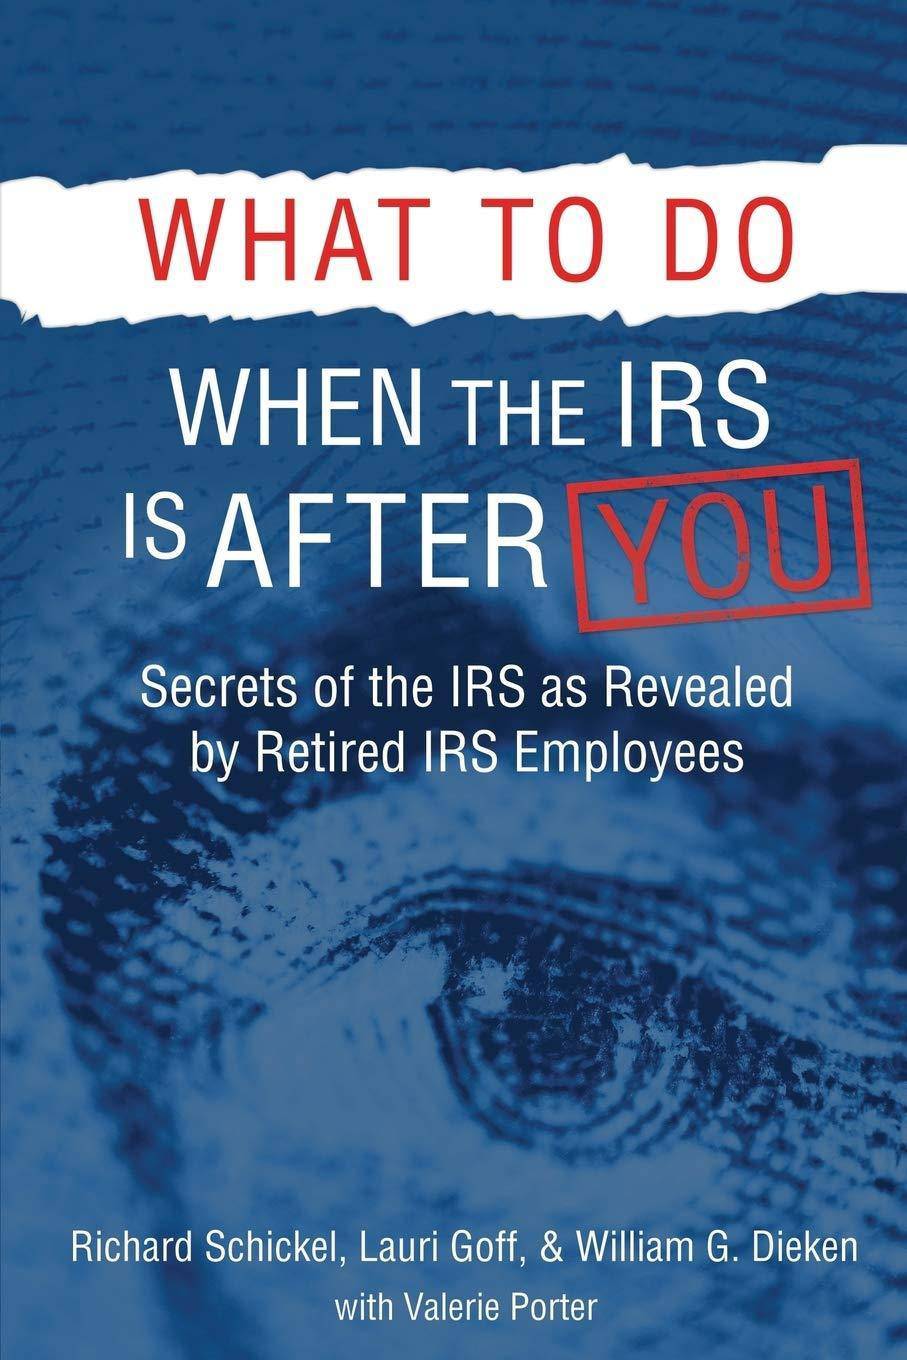 What to Do When the IRS is After You - SureShot Books Publishing LLC